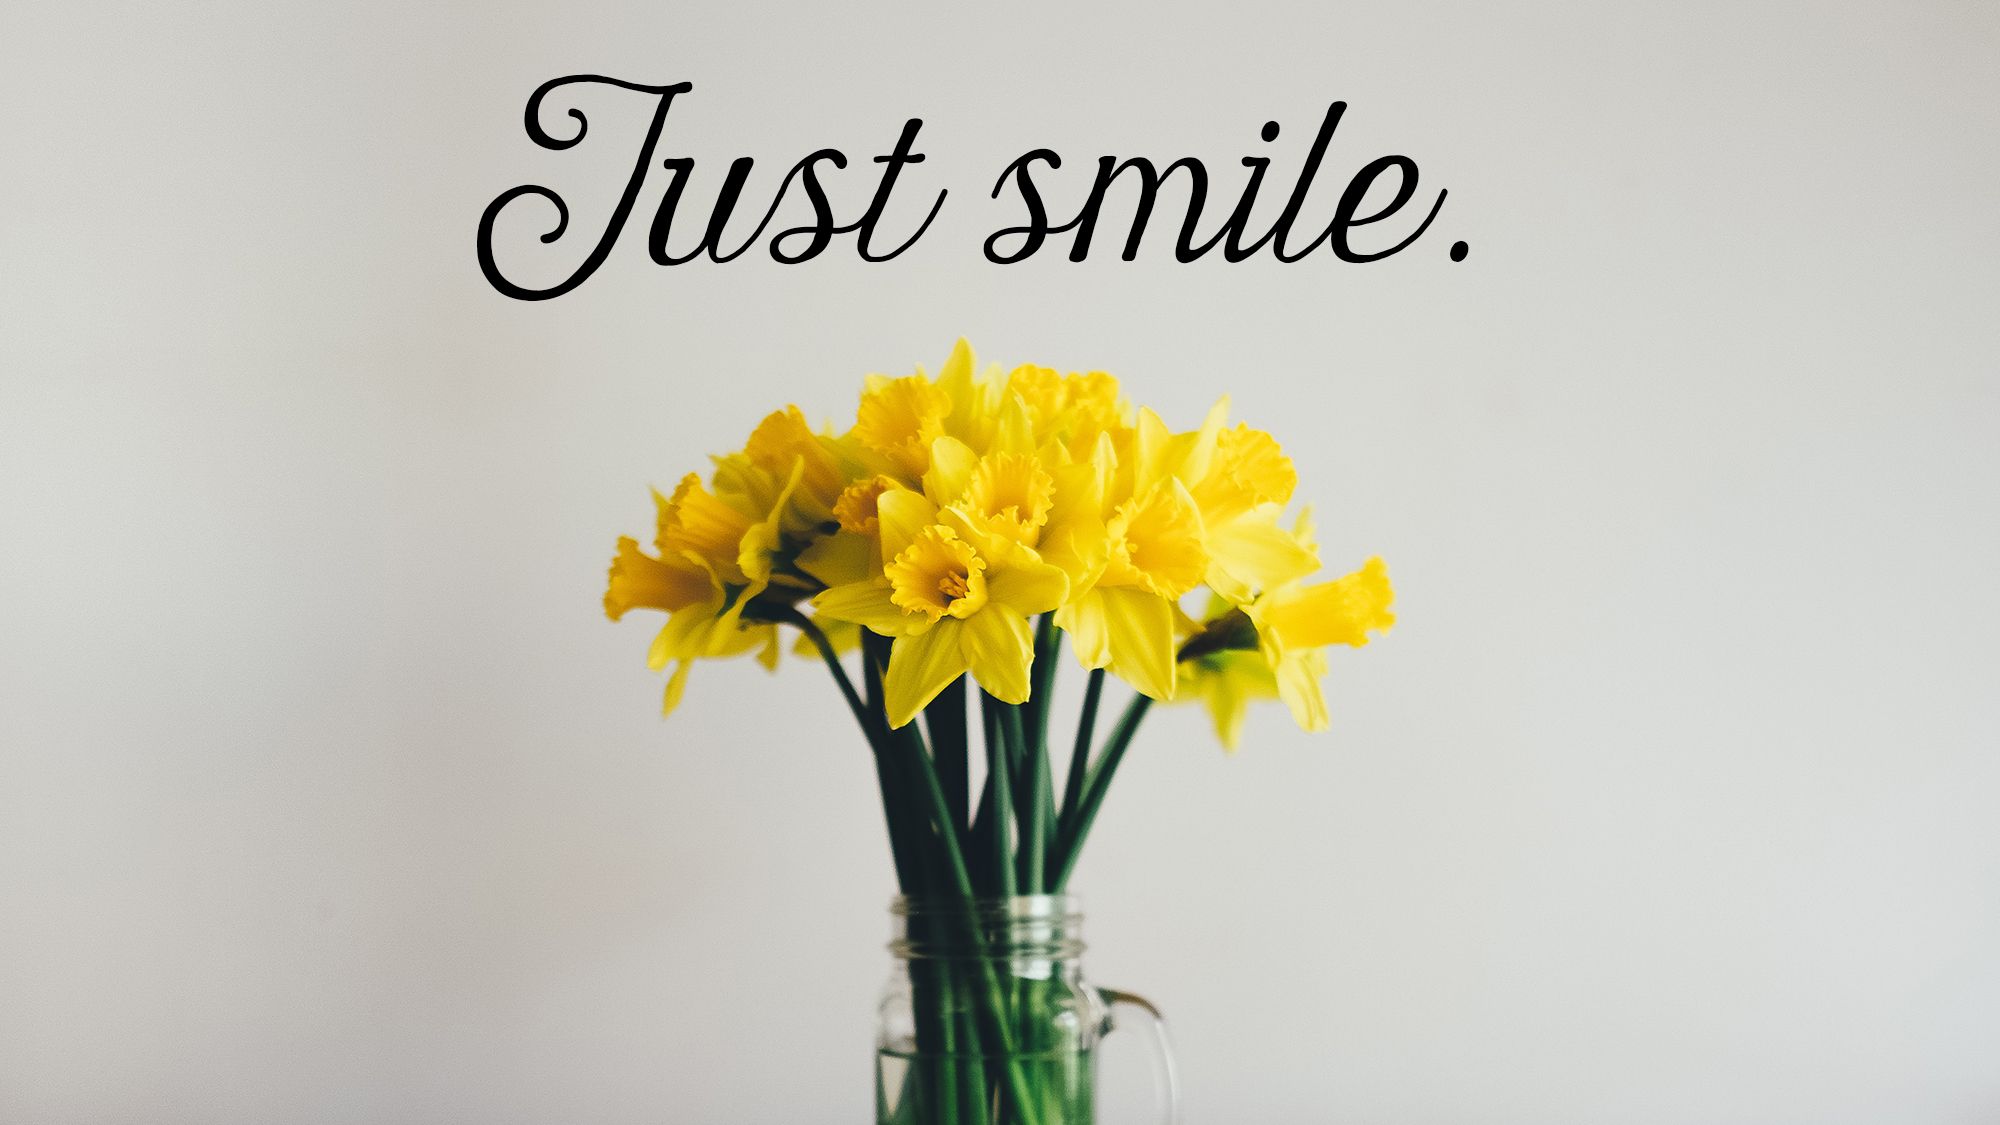 happy smile quotes about life